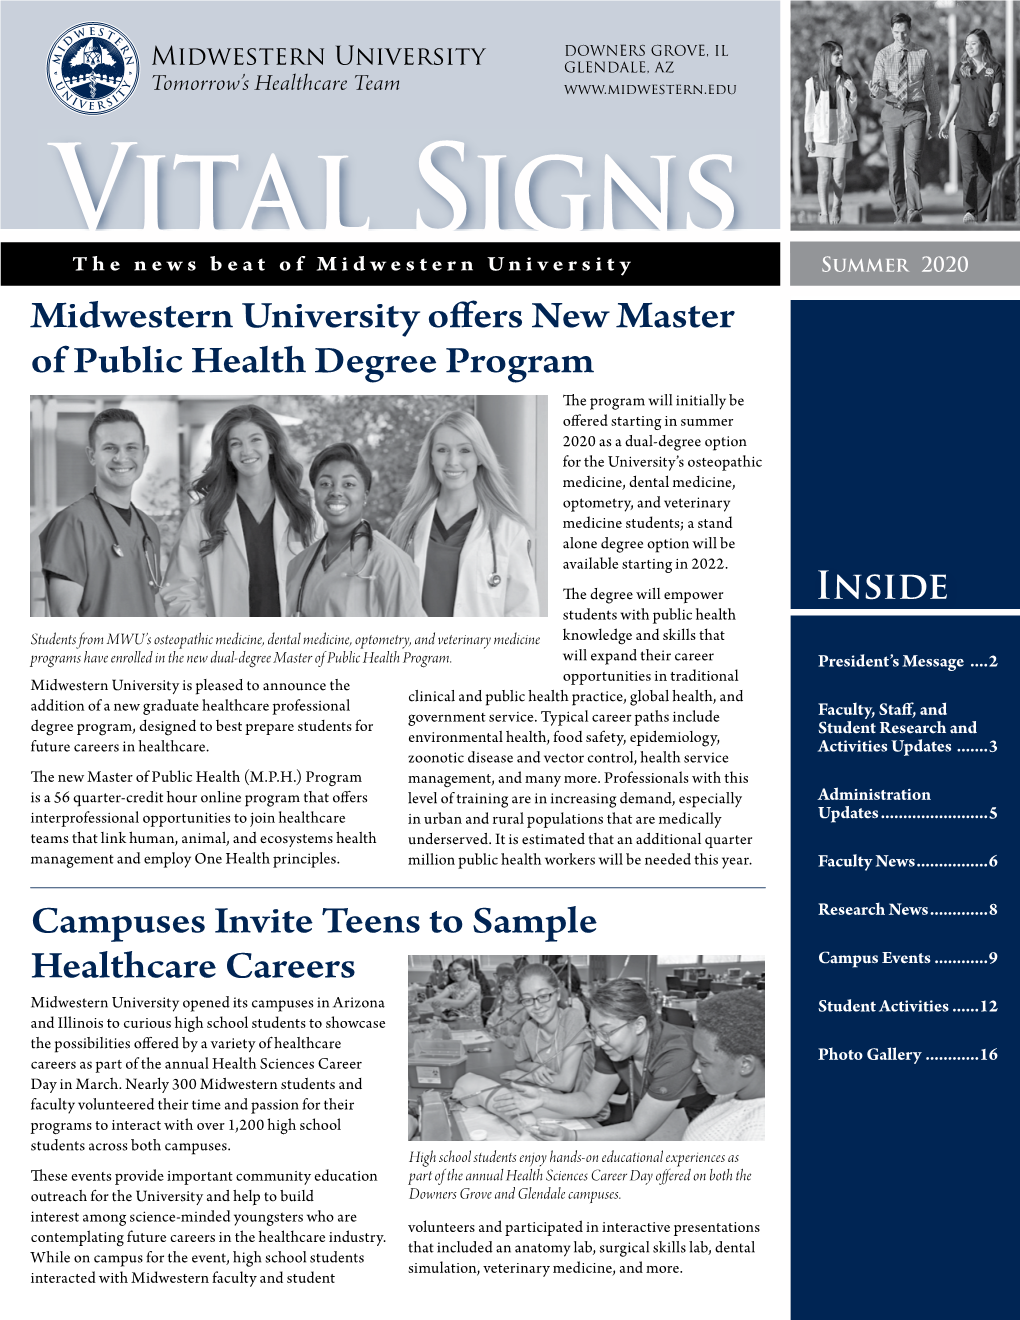 Midwestern University Offers New Master of Public Health Degree